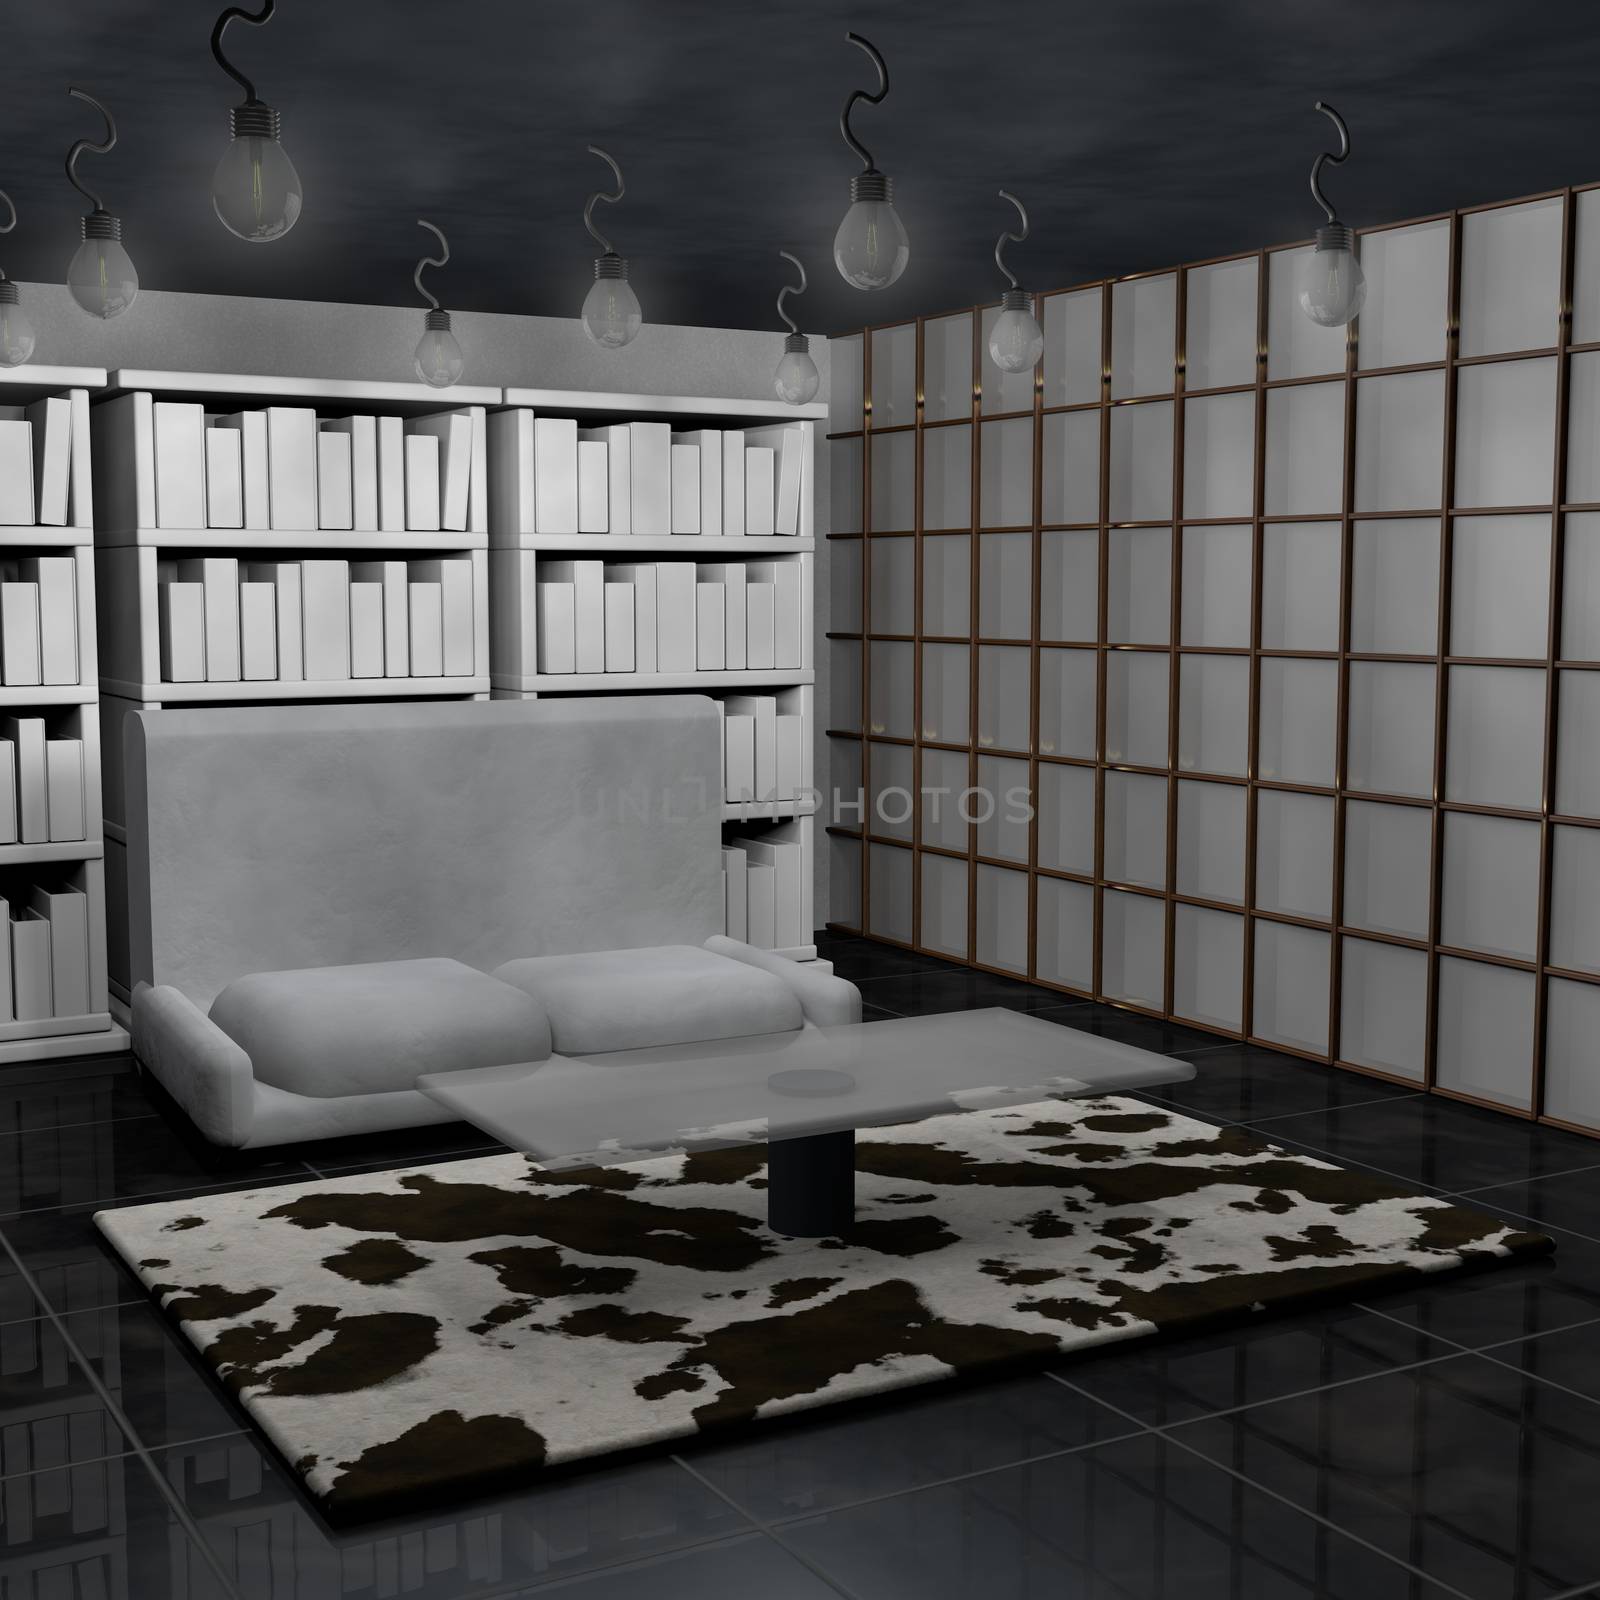 Lounge with white leather sofa and libraries, 3d render